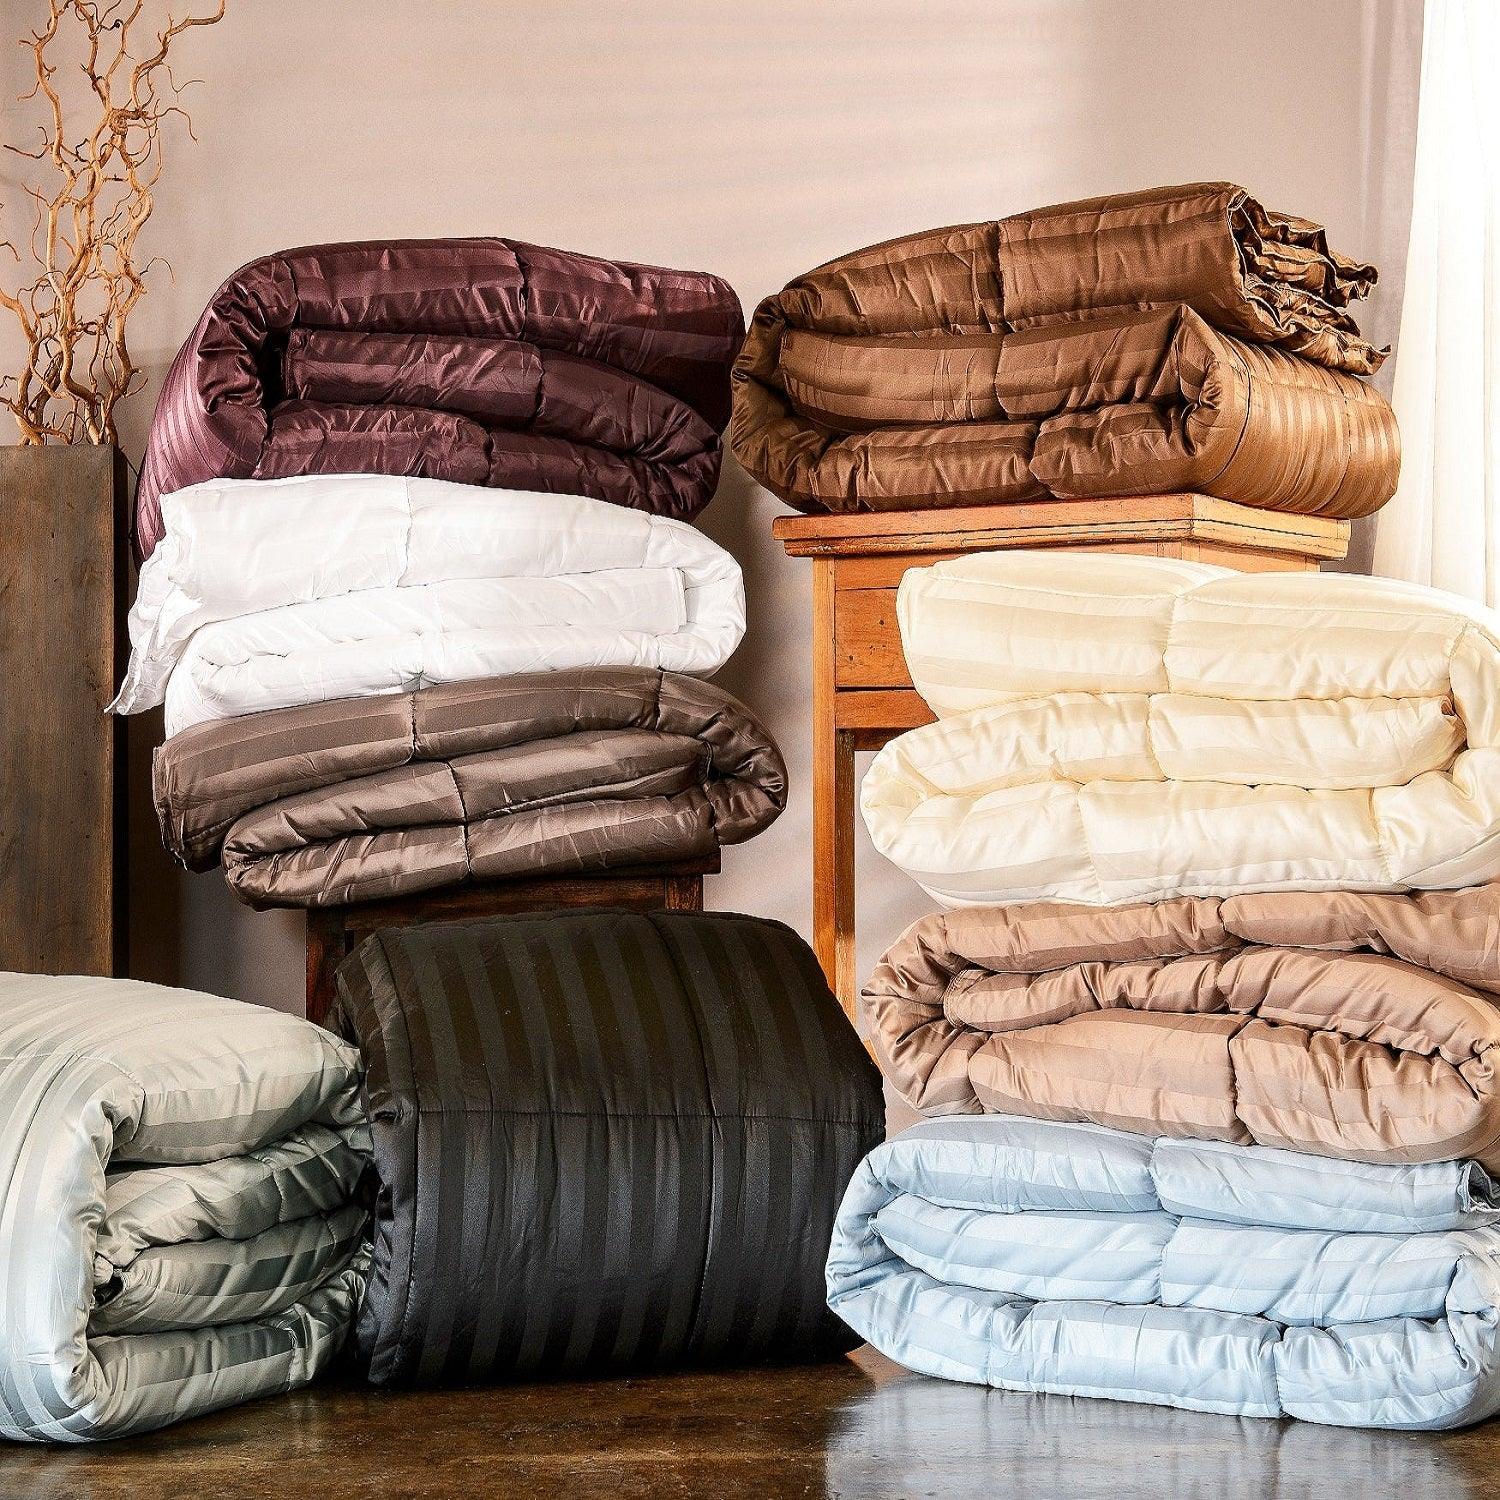 The Components Of A Comforter Set - Home City Inc